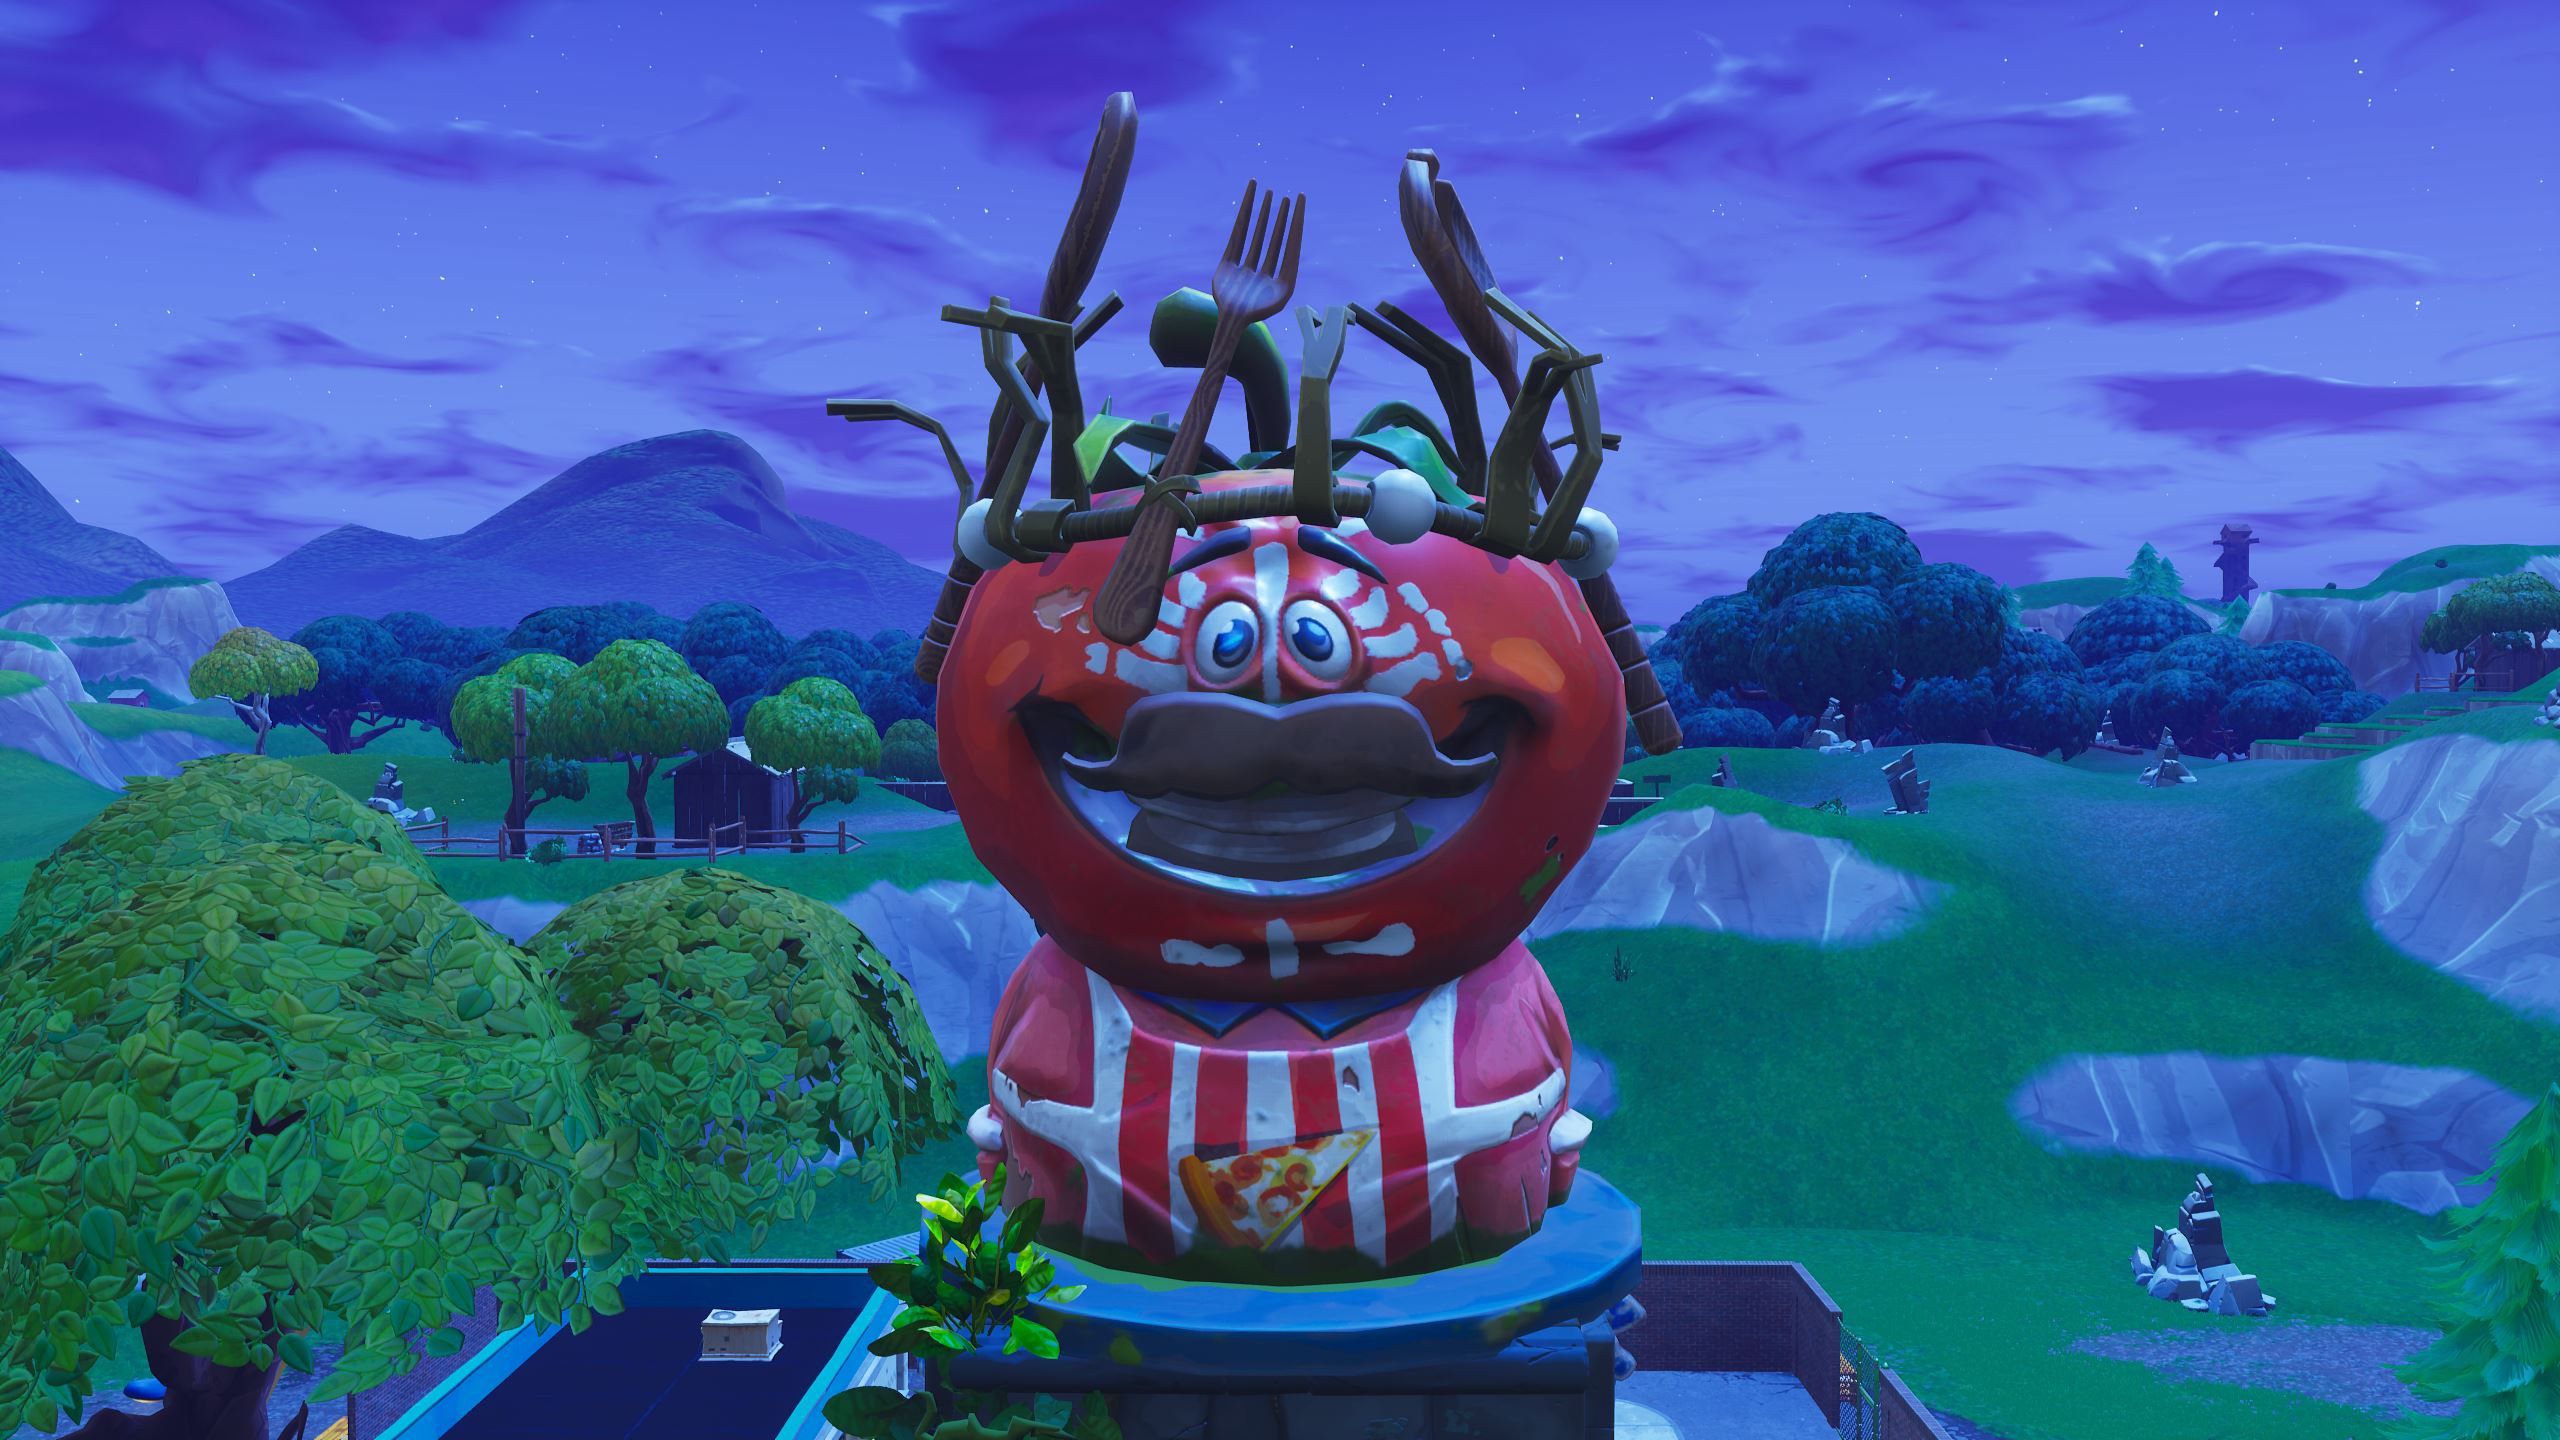 Fortnite See Tomato Temple And The Kingly New Tomatohead Skin Pc - fortnite see tomato temple and the kingly new tomatohead skin pc gamer